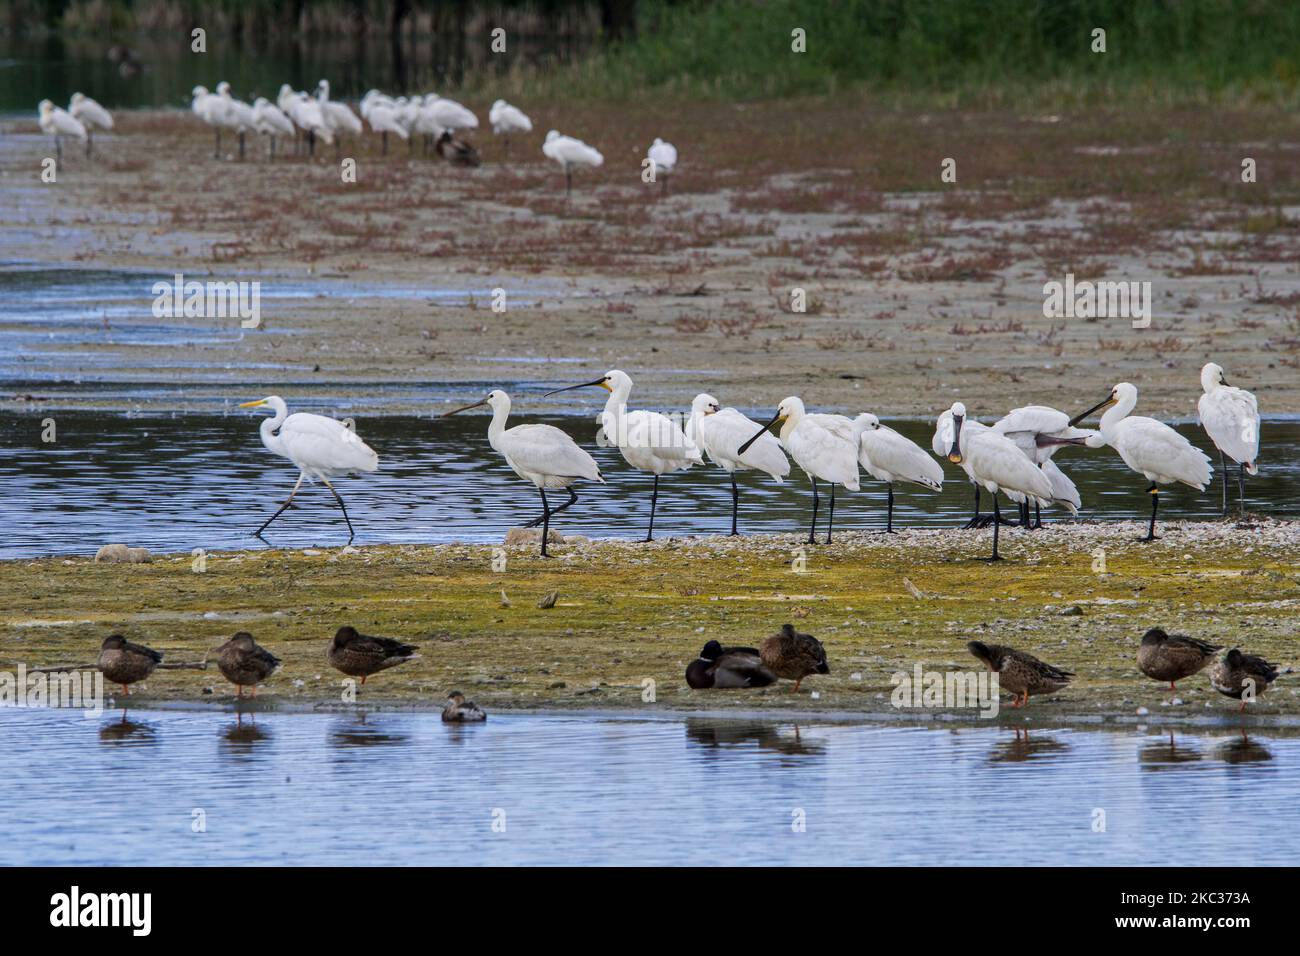 Eurasian spoonbills / common spoonbill (Platalea leucorodia) flock resting in wetland in autumn / fall, Marquenterre park, Bay of the Somme, France Stock Photo